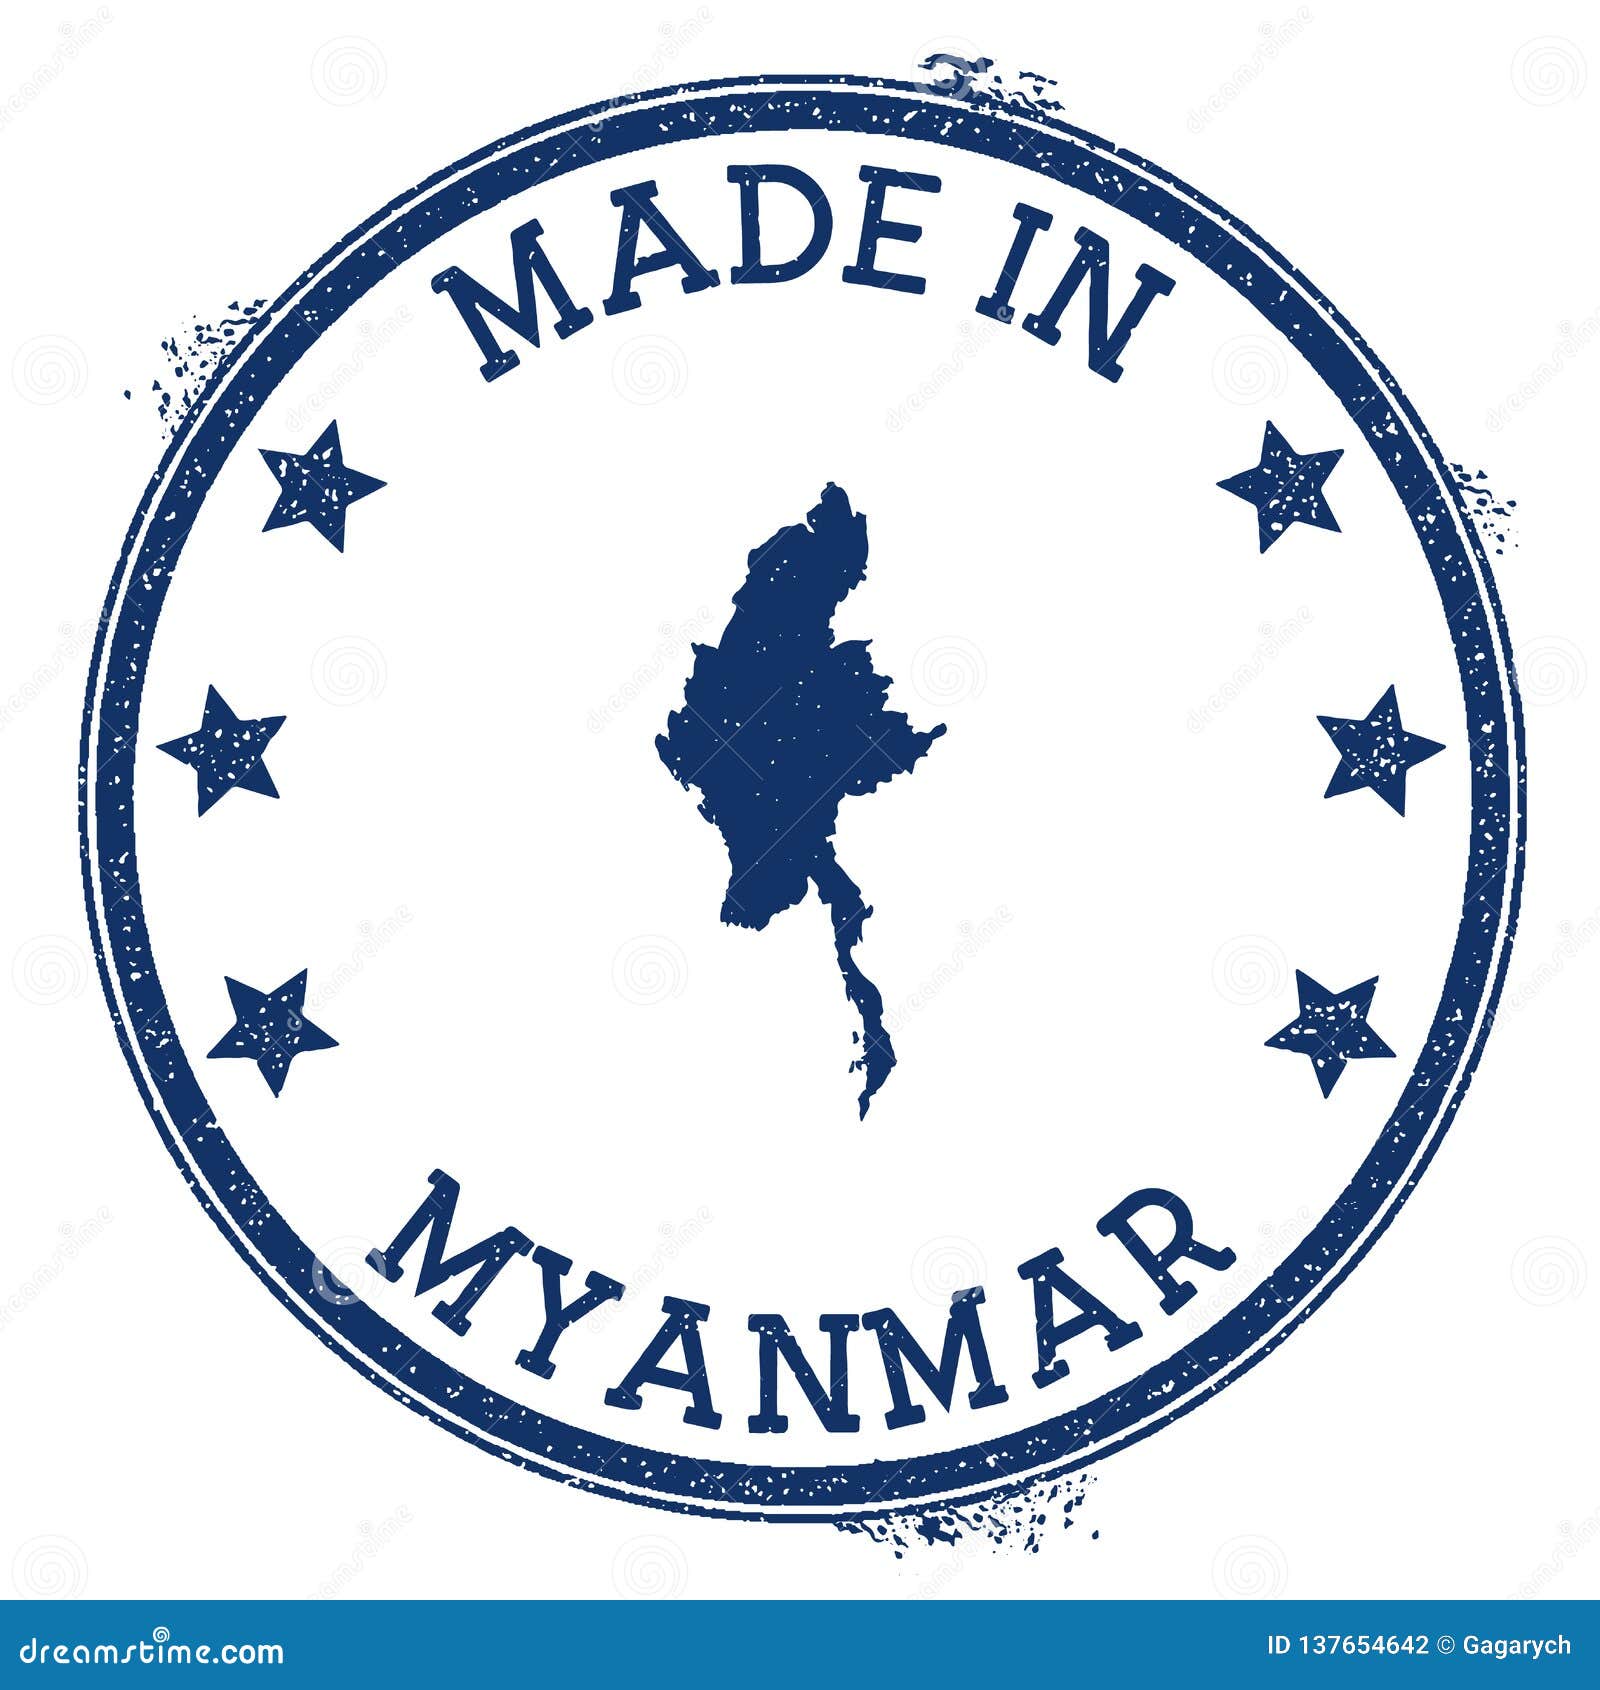 Made in myanmar. Made in Myanmar Страна производитель. Made in Myanmar Страна. Made in Myanmar Страна производитель бренда.